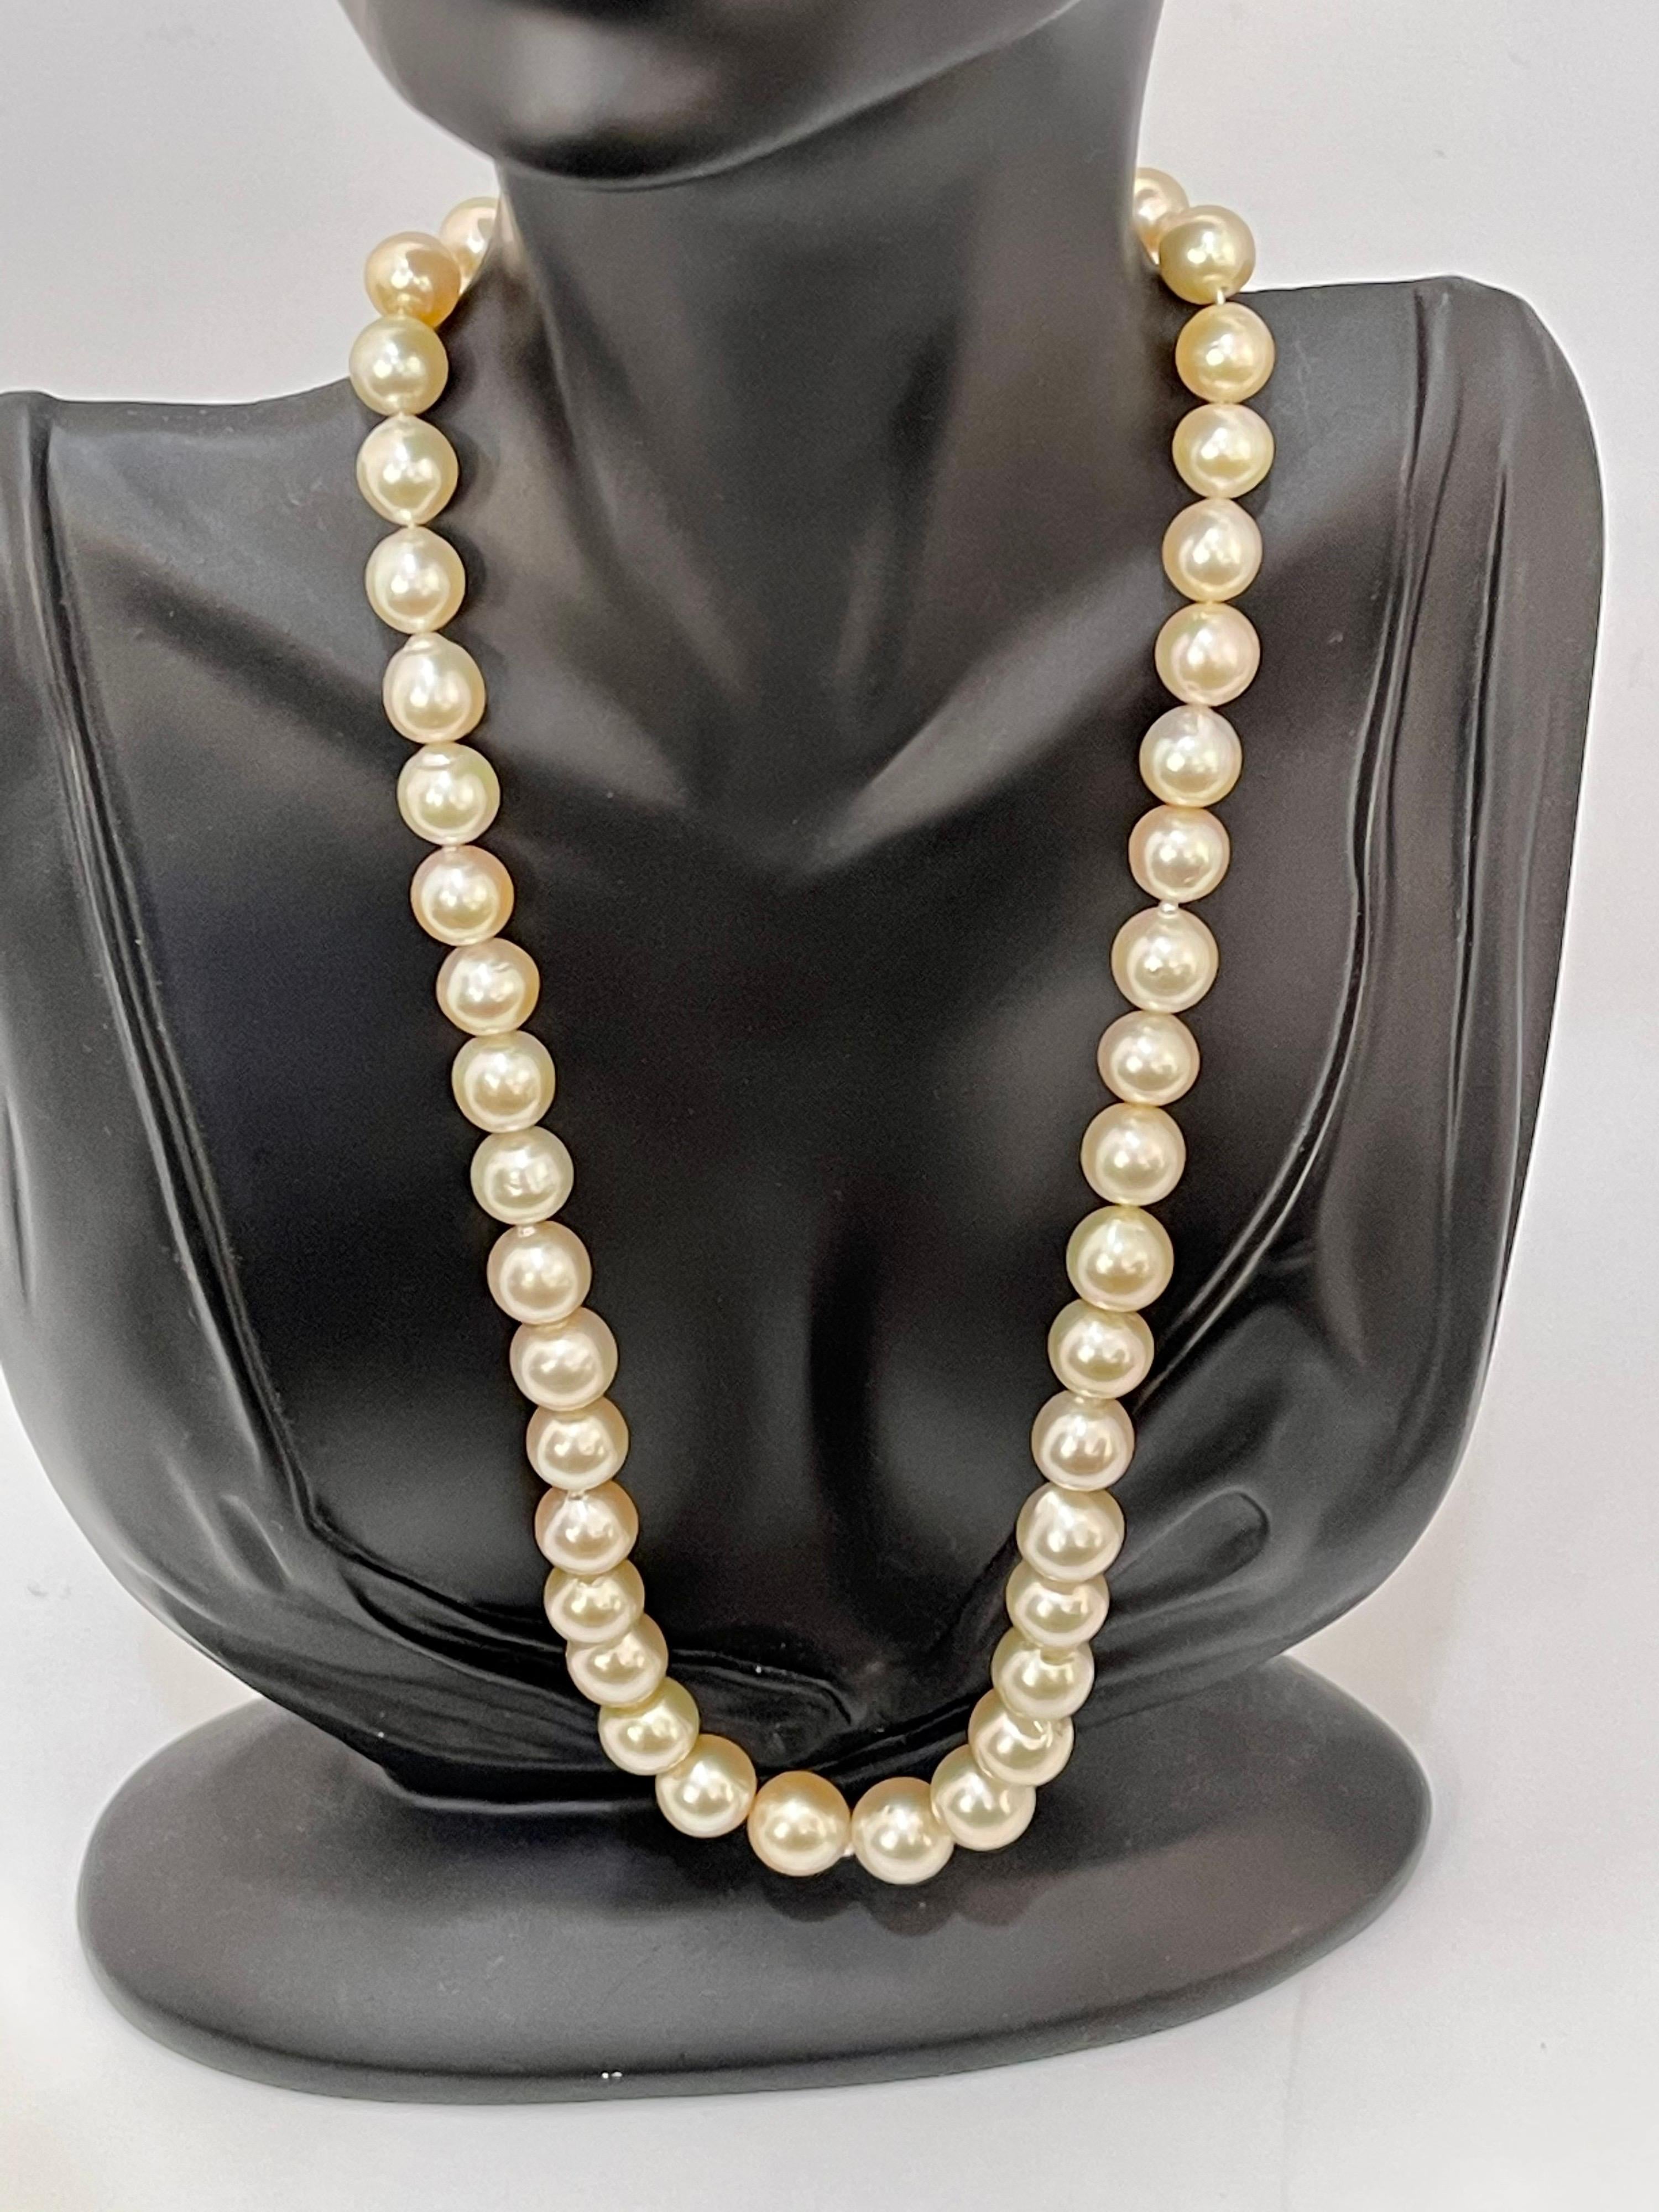 Graduating Cream Color South Sea Pearls Necklace 14 Karat Yellow Gold Clasp For Sale 3